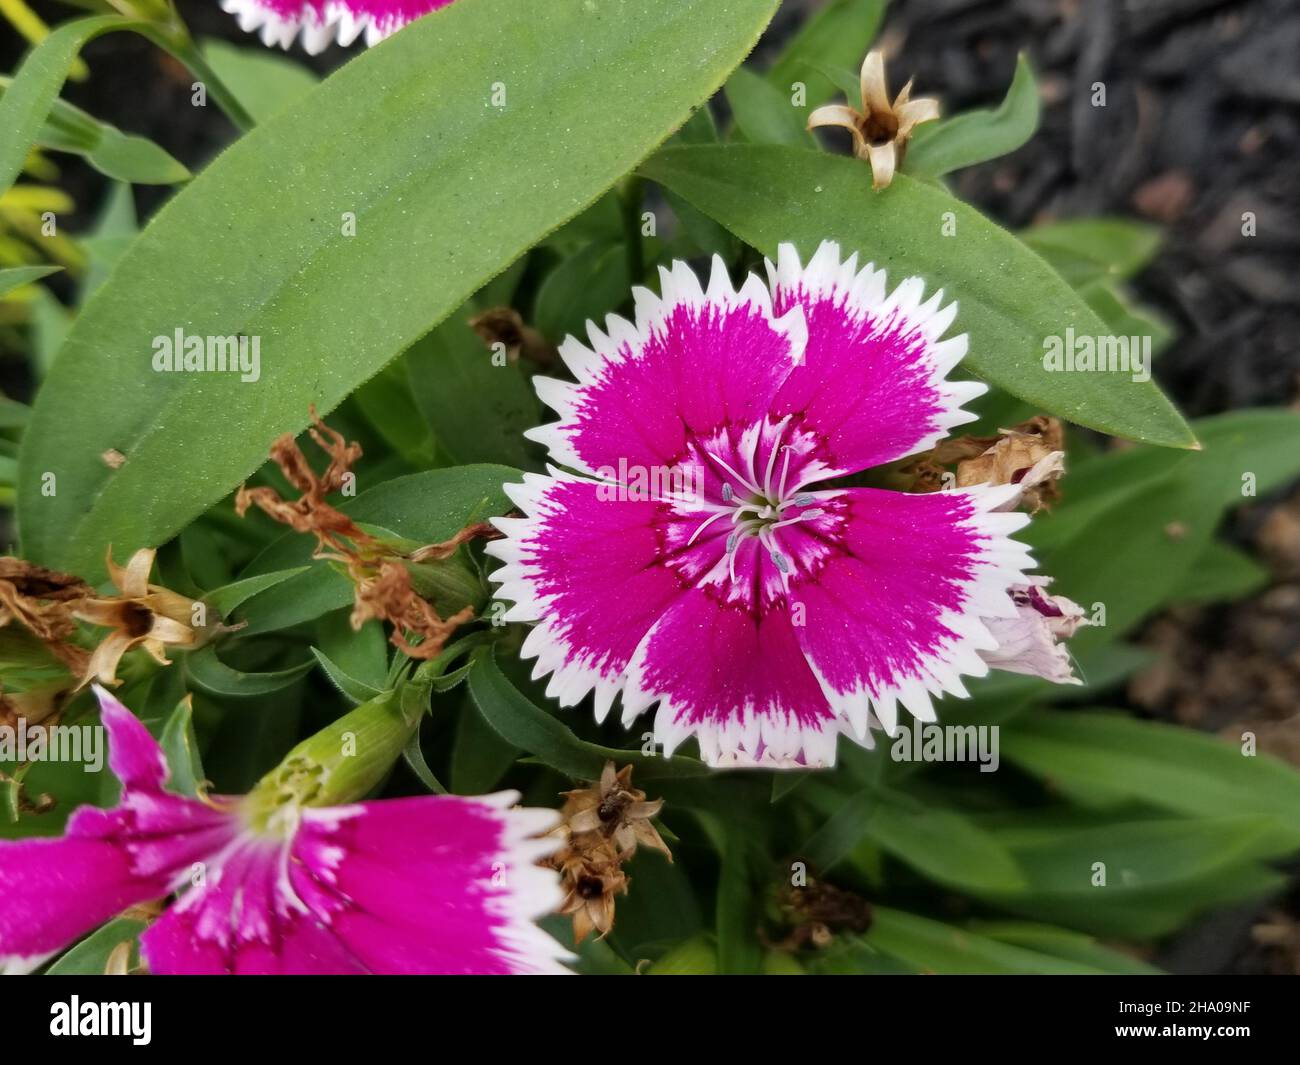 Bright pink flowers of Dianthus gratianopolitanus, commonly known as cheddar pink, on a blurred background of green leaves -01 Stock Photo